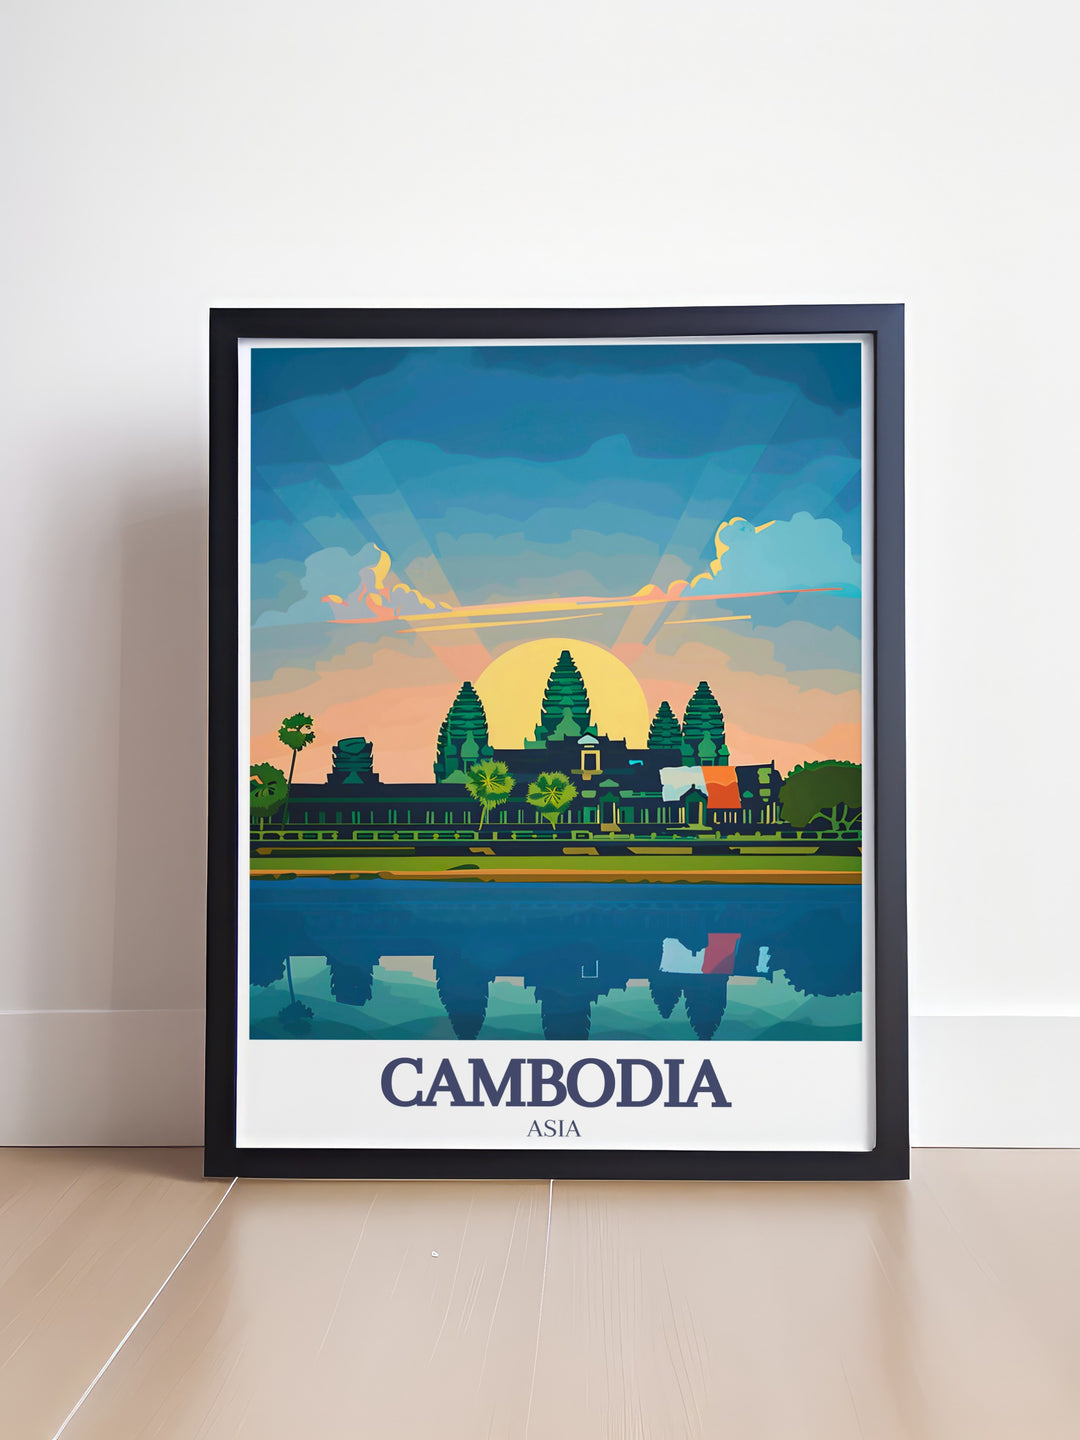 Siem Reaps Angkor Wat Khmer temple depicted in an exquisite art print. This wall art celebrates the sophistication and beauty of Khmer architecture. A perfect addition to any collection of Southeast Asian art and historical prints.